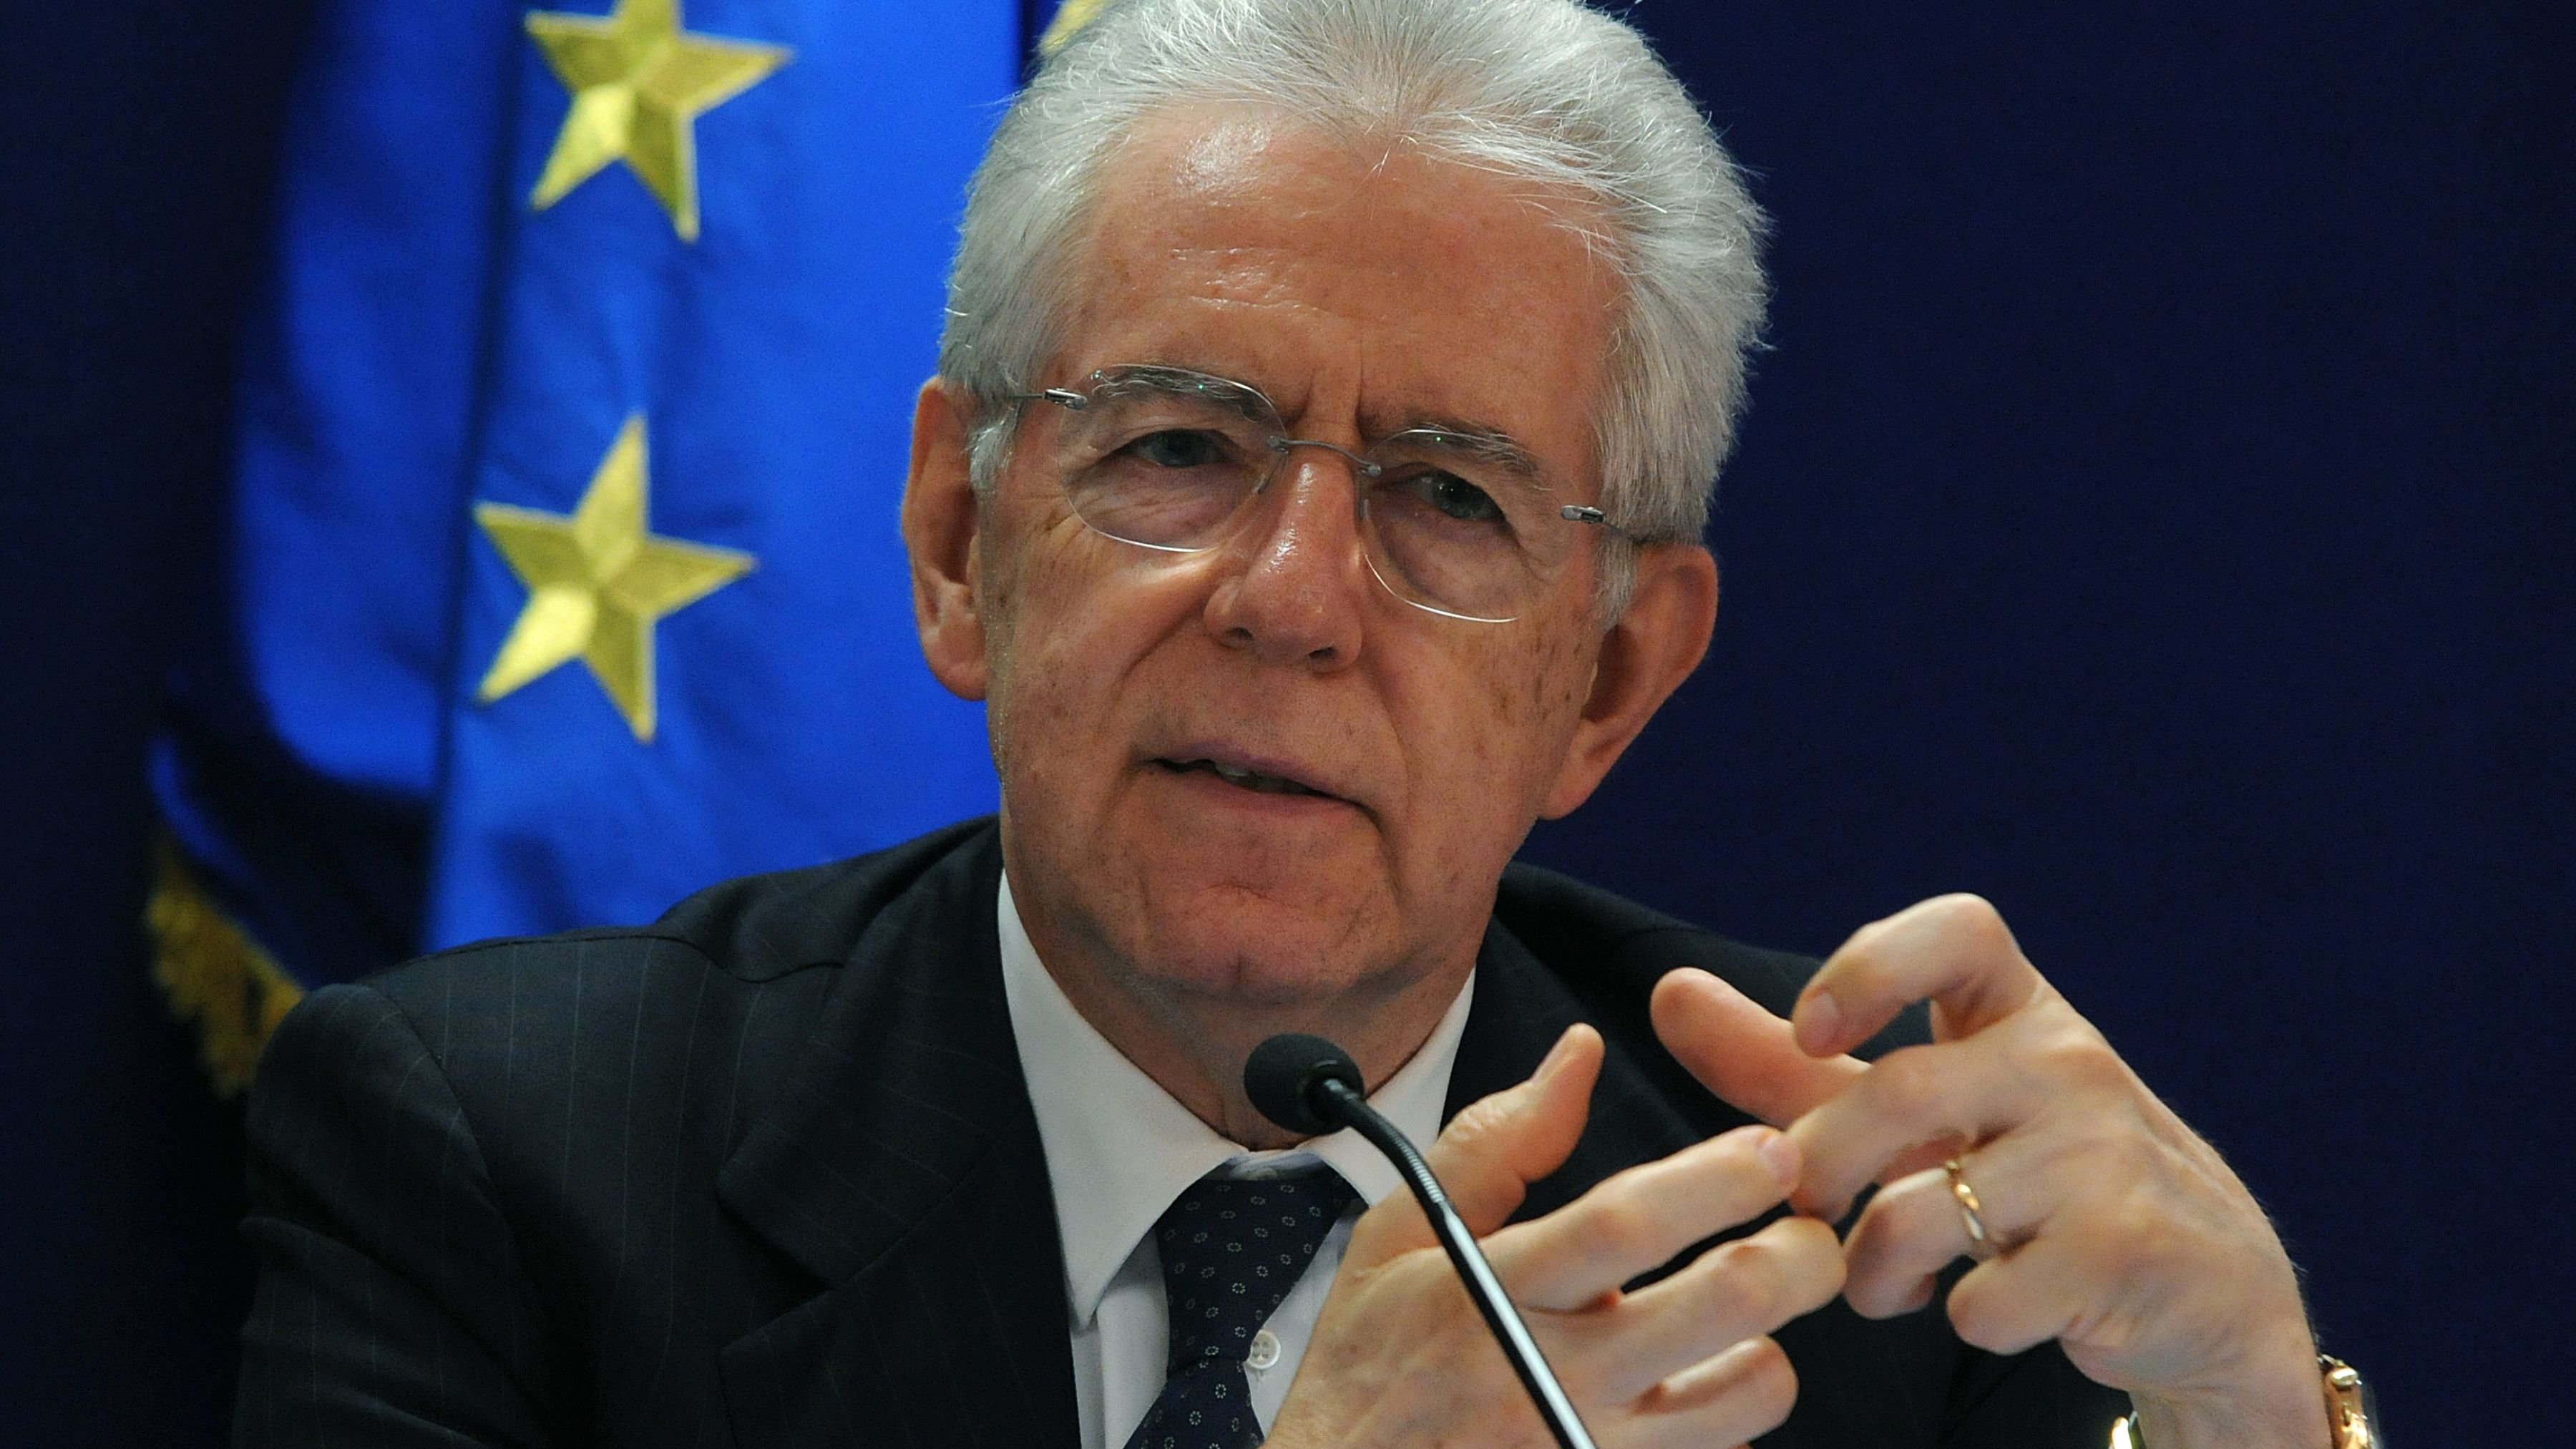 Italian Prime Minister Mario Monti speaks during a press conference after a meeting of European Union leaders in Brussels, May 24, 2012.